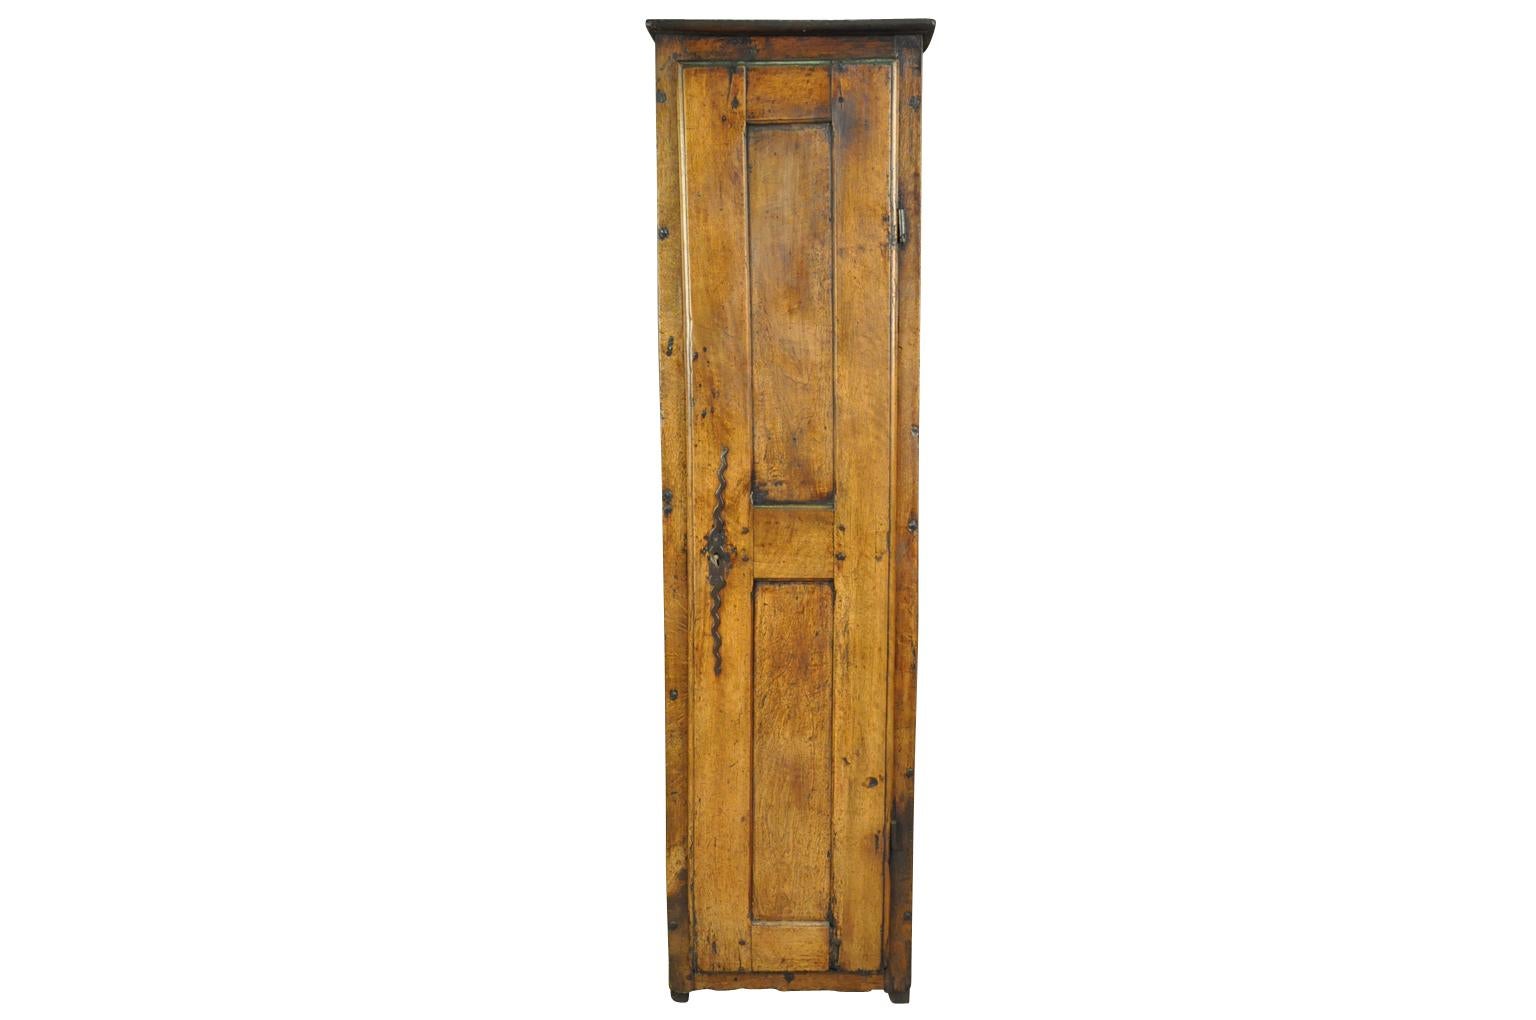 A very charming and primitive narrow cupboard - bonatiere from the South of France. Soundly constructed from walnut and chestnut with a shaped door panel, terrific hardware, sculpted apron and interior shelving. Super patina.